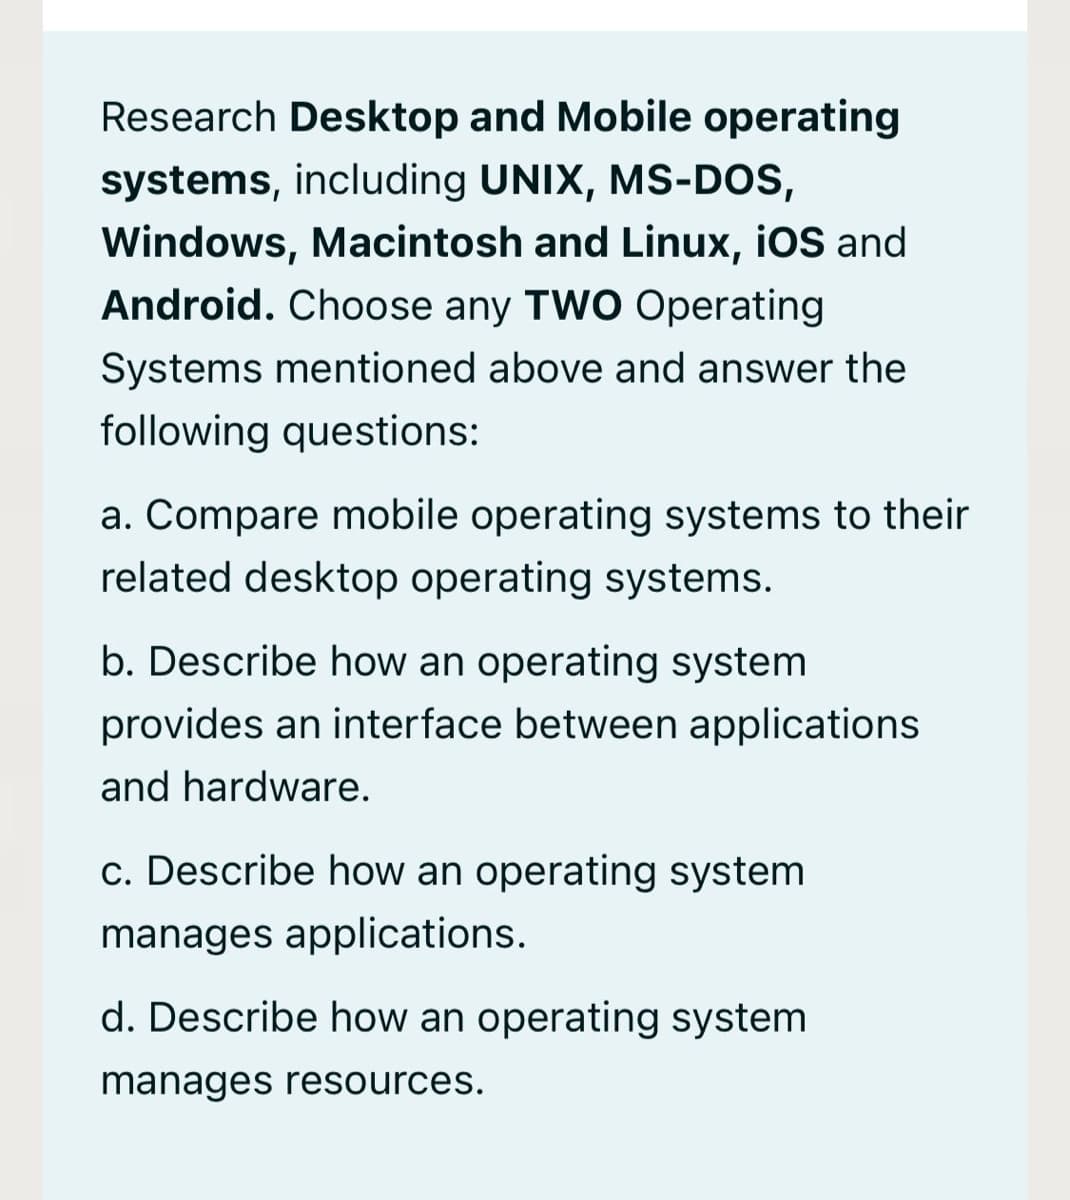 Research Desktop and Mobile operating
systems, including UNIX, MS-DoS,
Windows, Macintosh and Linux, iOS and
Android. Choose any TW0 Operating
Systems mentioned above and answer the
following questions:
a. Compare mobile operating systems to their
related desktop operating systems.
b. Describe how an operating system
provides an interface between applications
and hardware.
c. Describe how an operating system
manages applications.
d. Describe how an operating system
manages resources.
